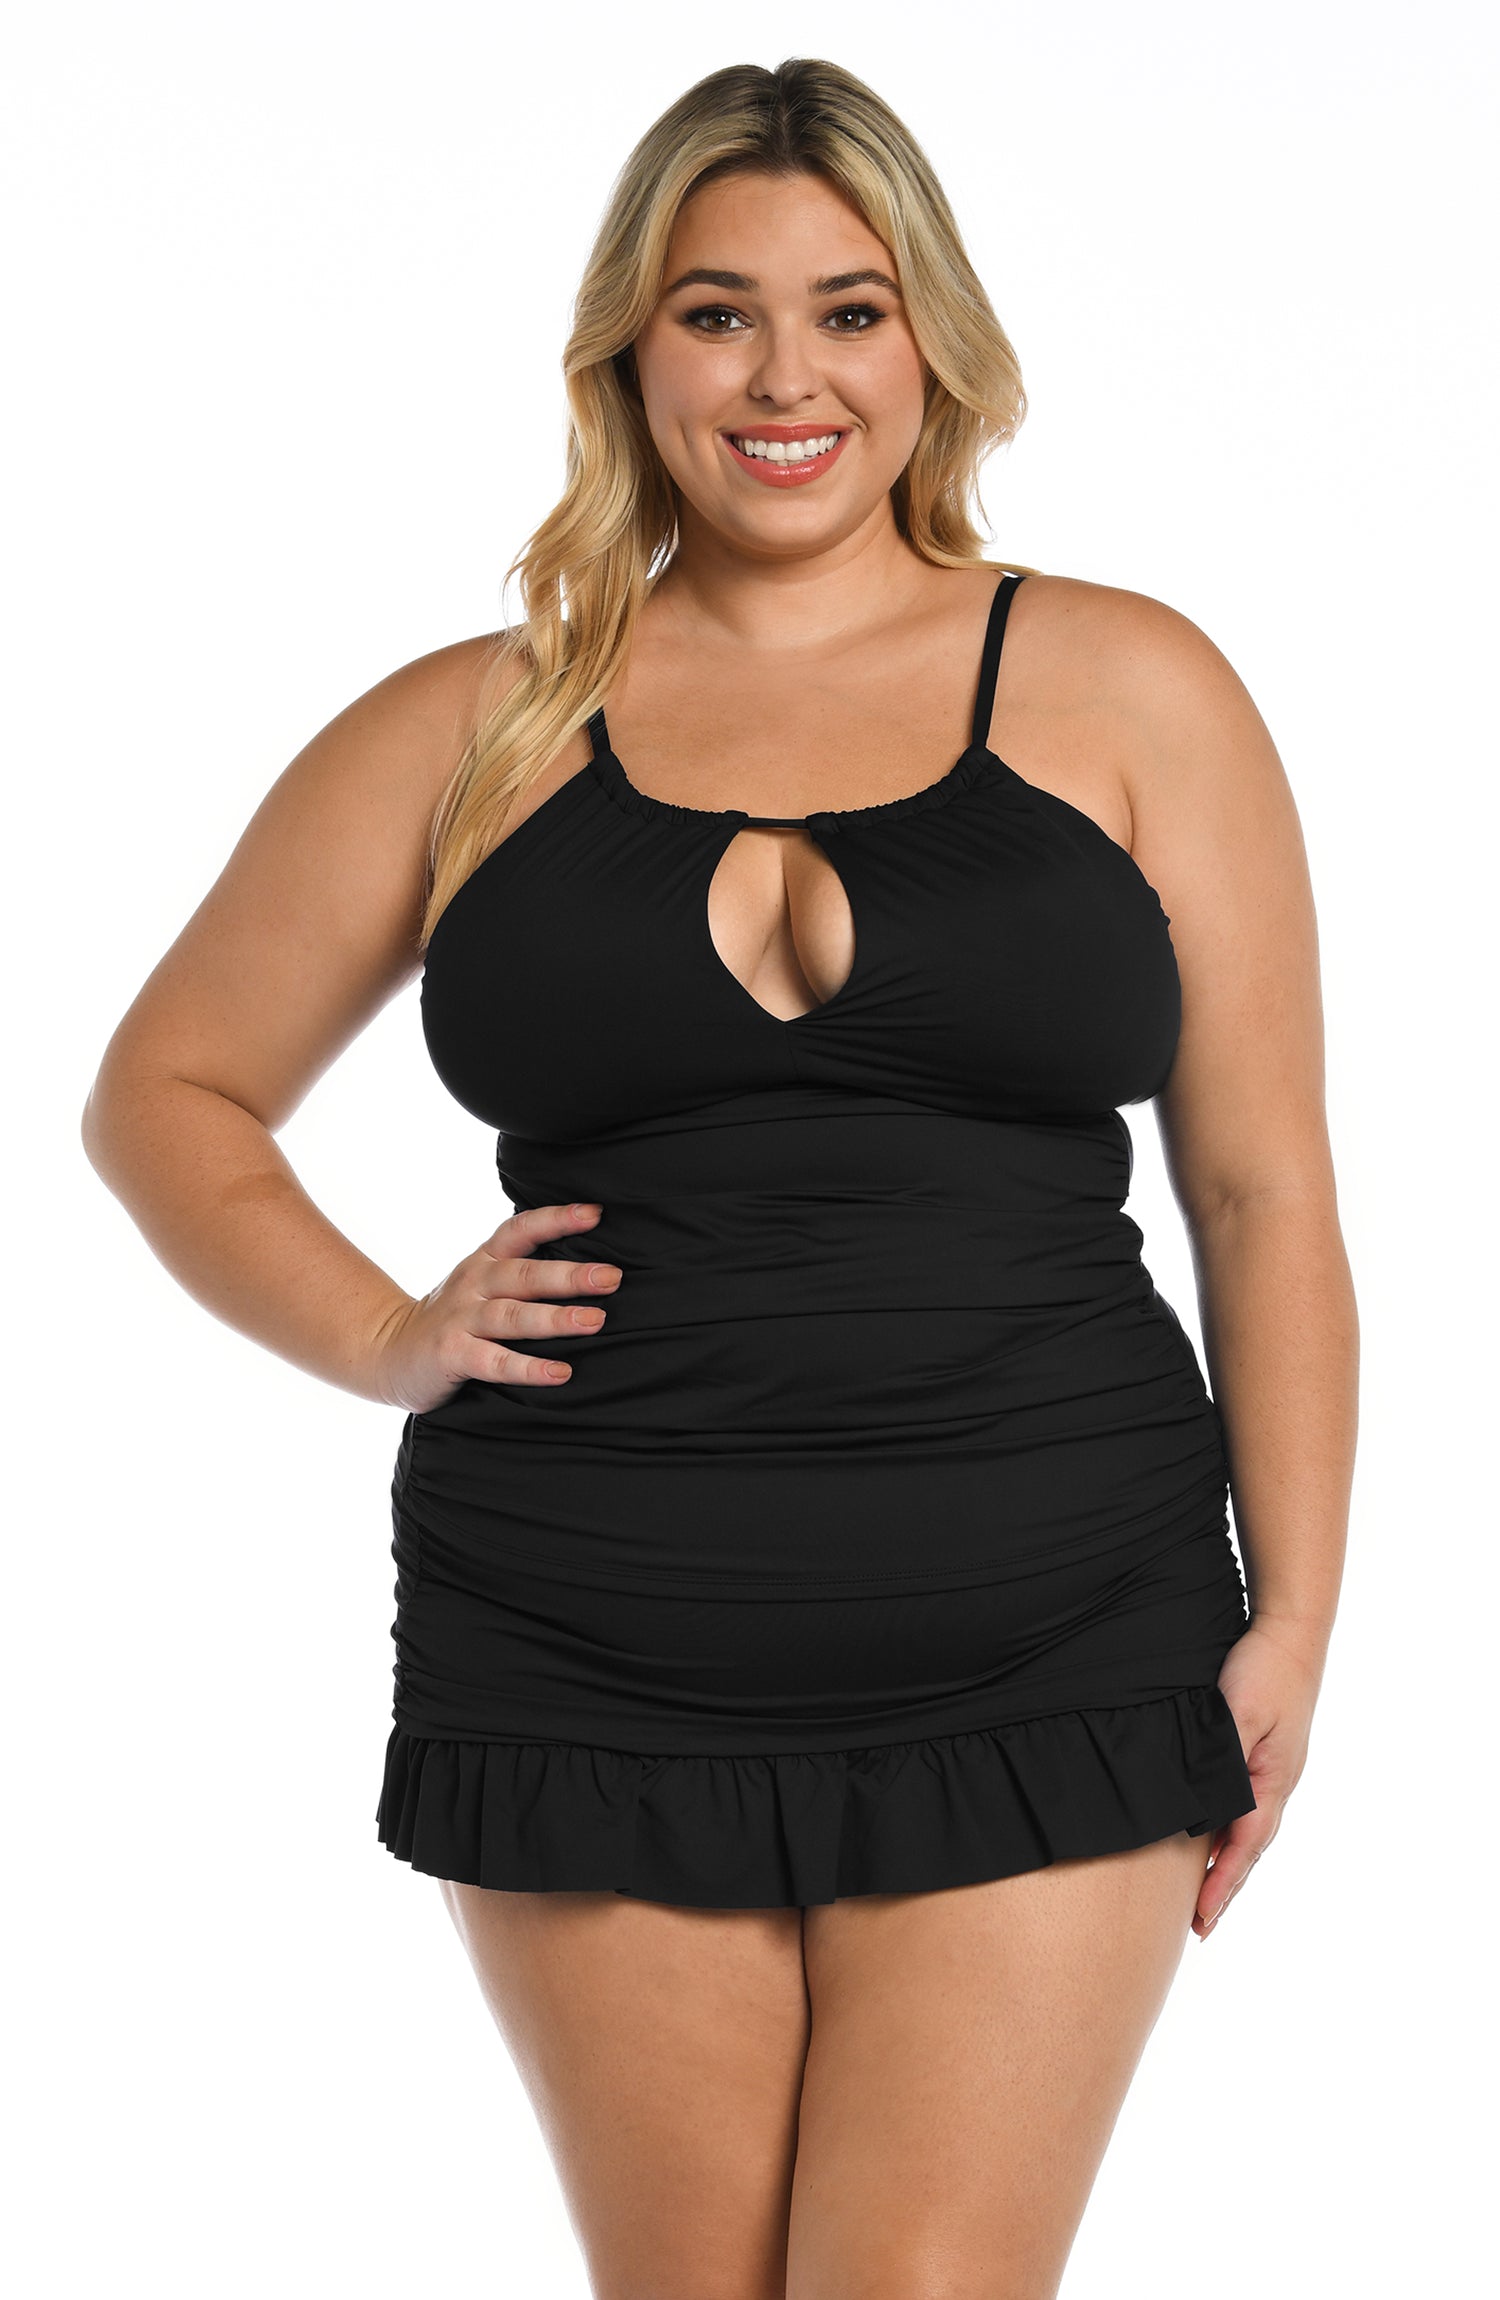 Model is wearing a black keyhole tankini swimsuit top from our Best-Selling Island Goddess collection.